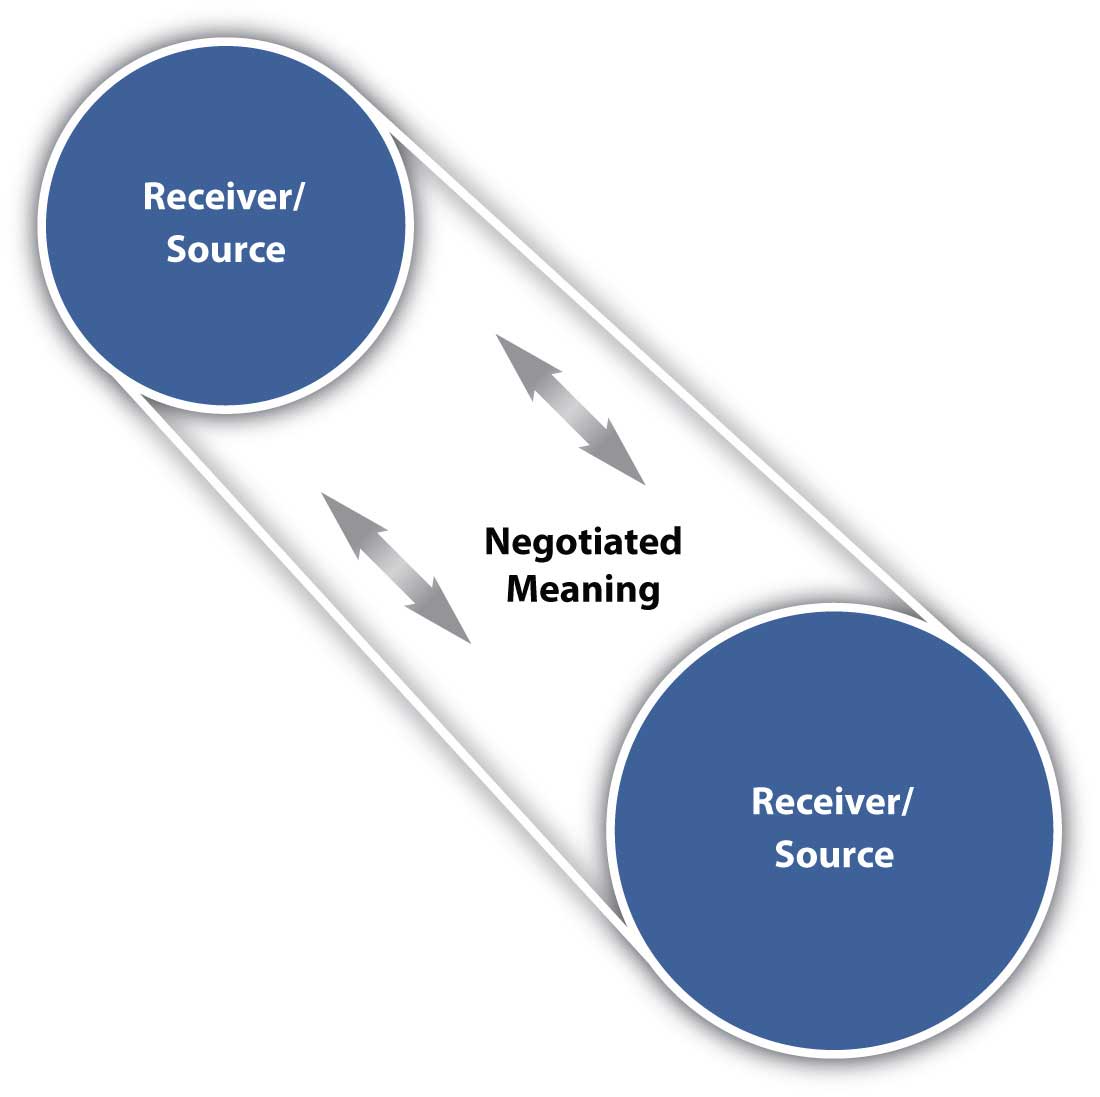 Constructivist Model of Communication showing two receiver/sources connected by "negotiated meaning"